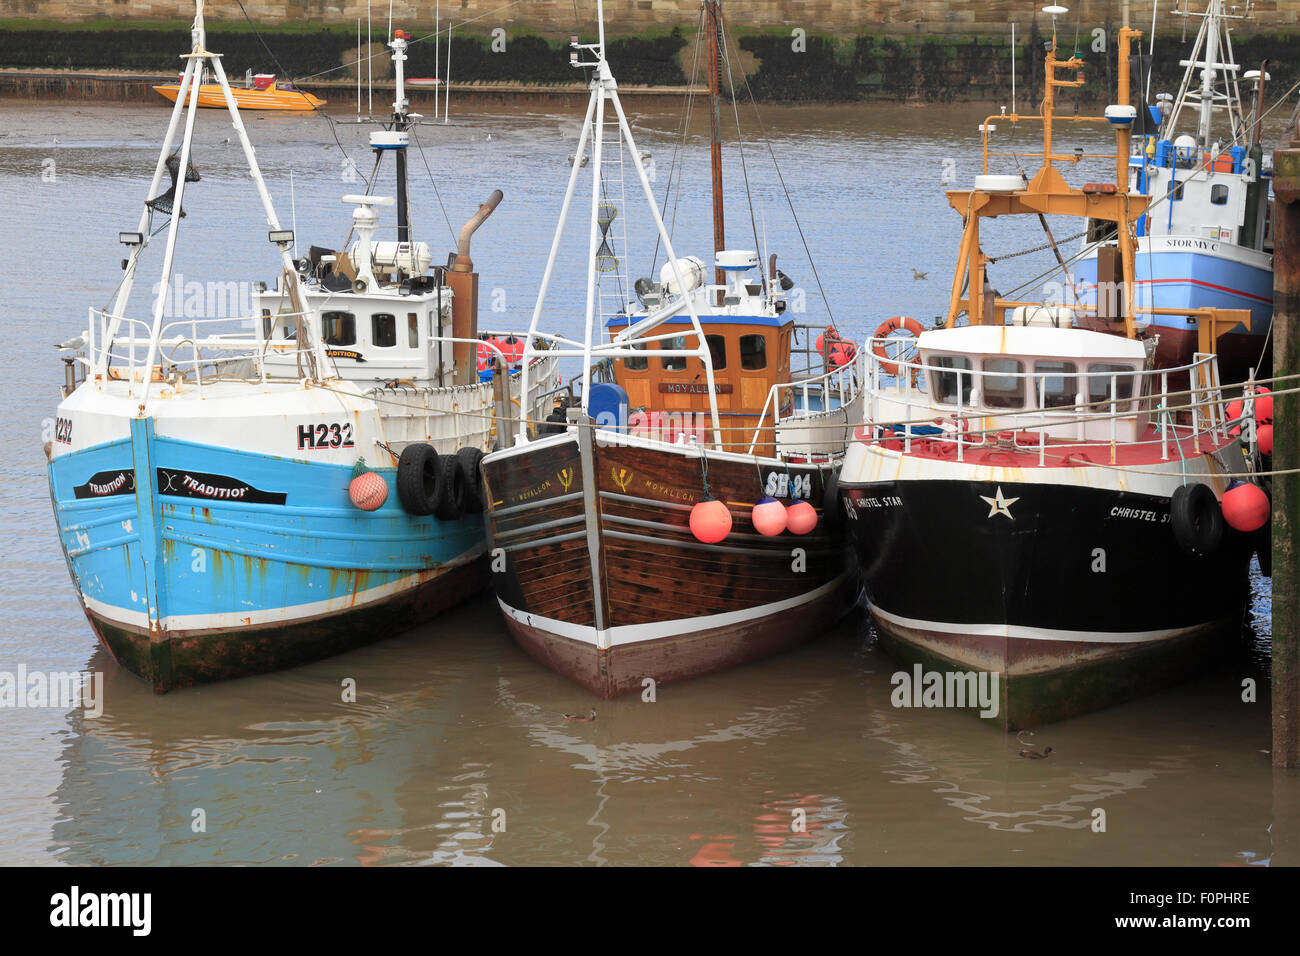 Fishing trawlers in the harbour, Bridlington, East Yorkshire, England, UK. Stock Photo